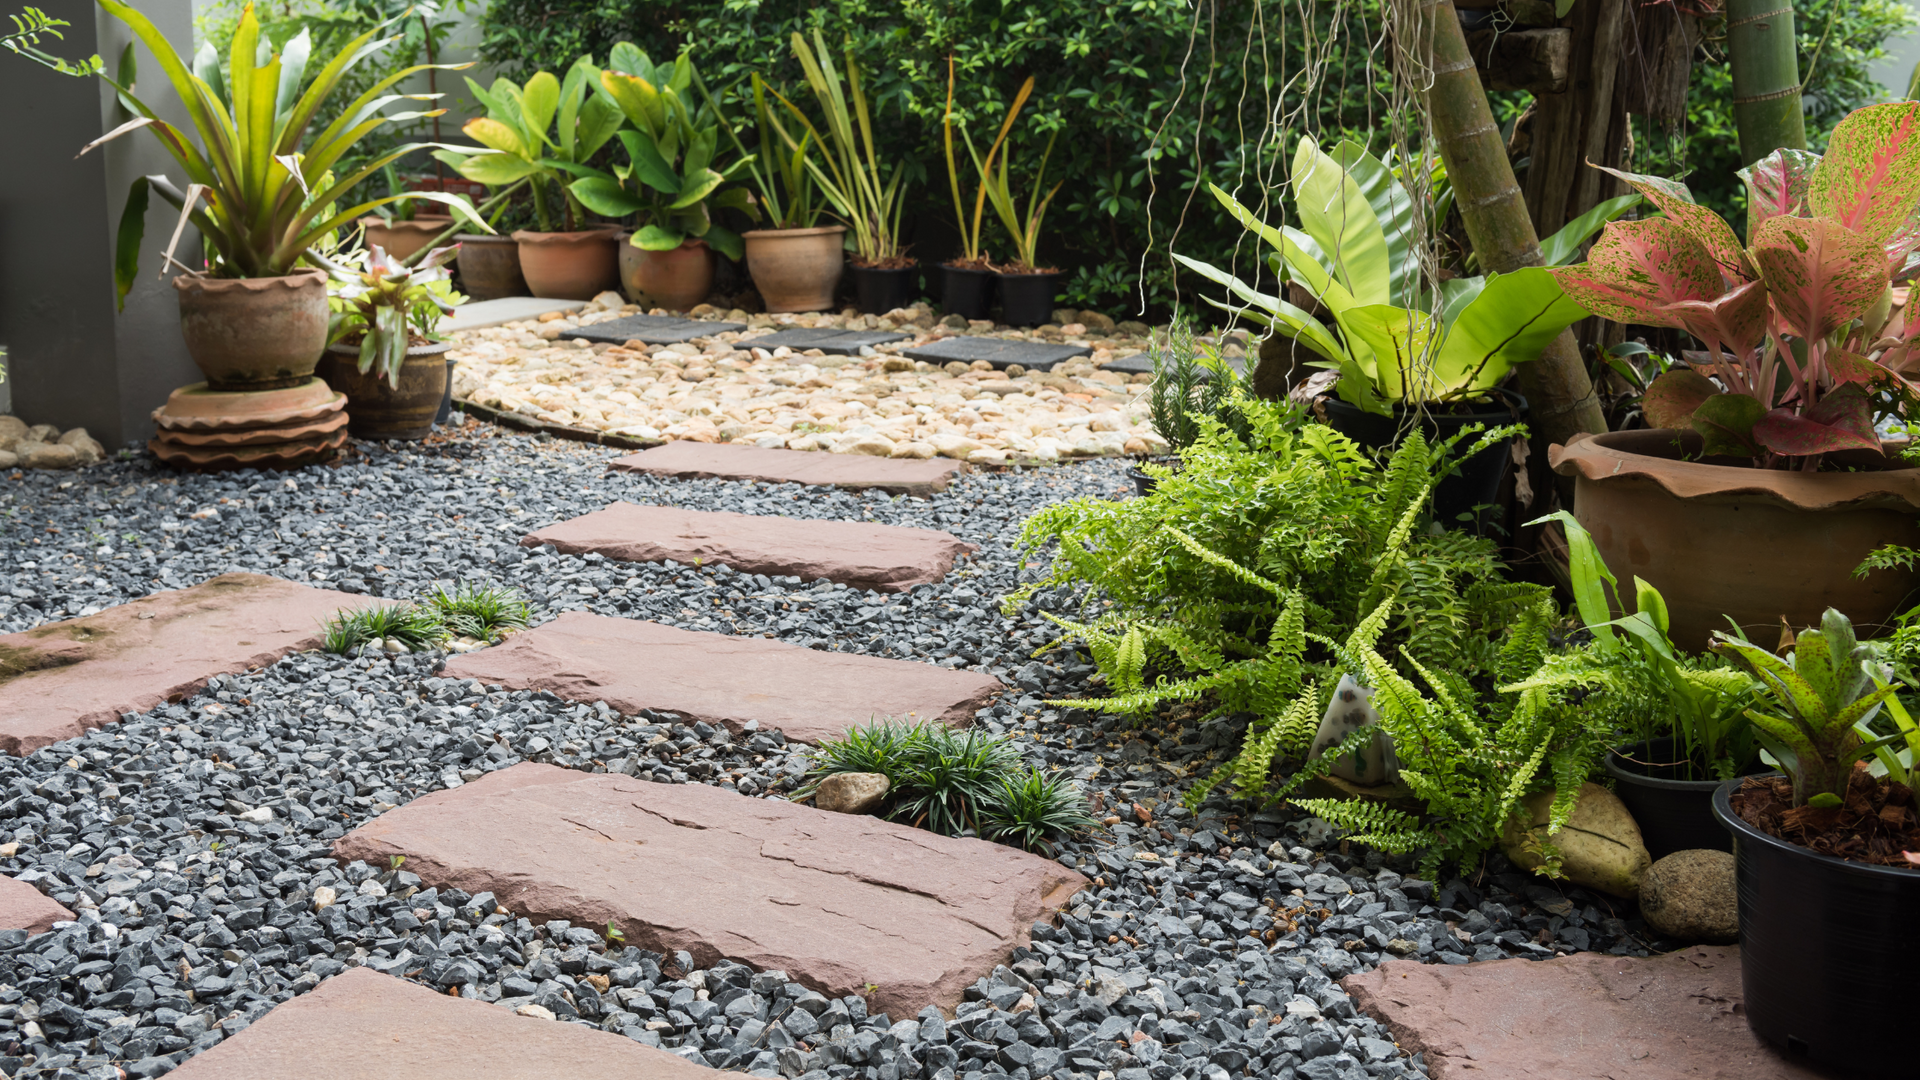 a serene garden with a stone path winding through potted plants.